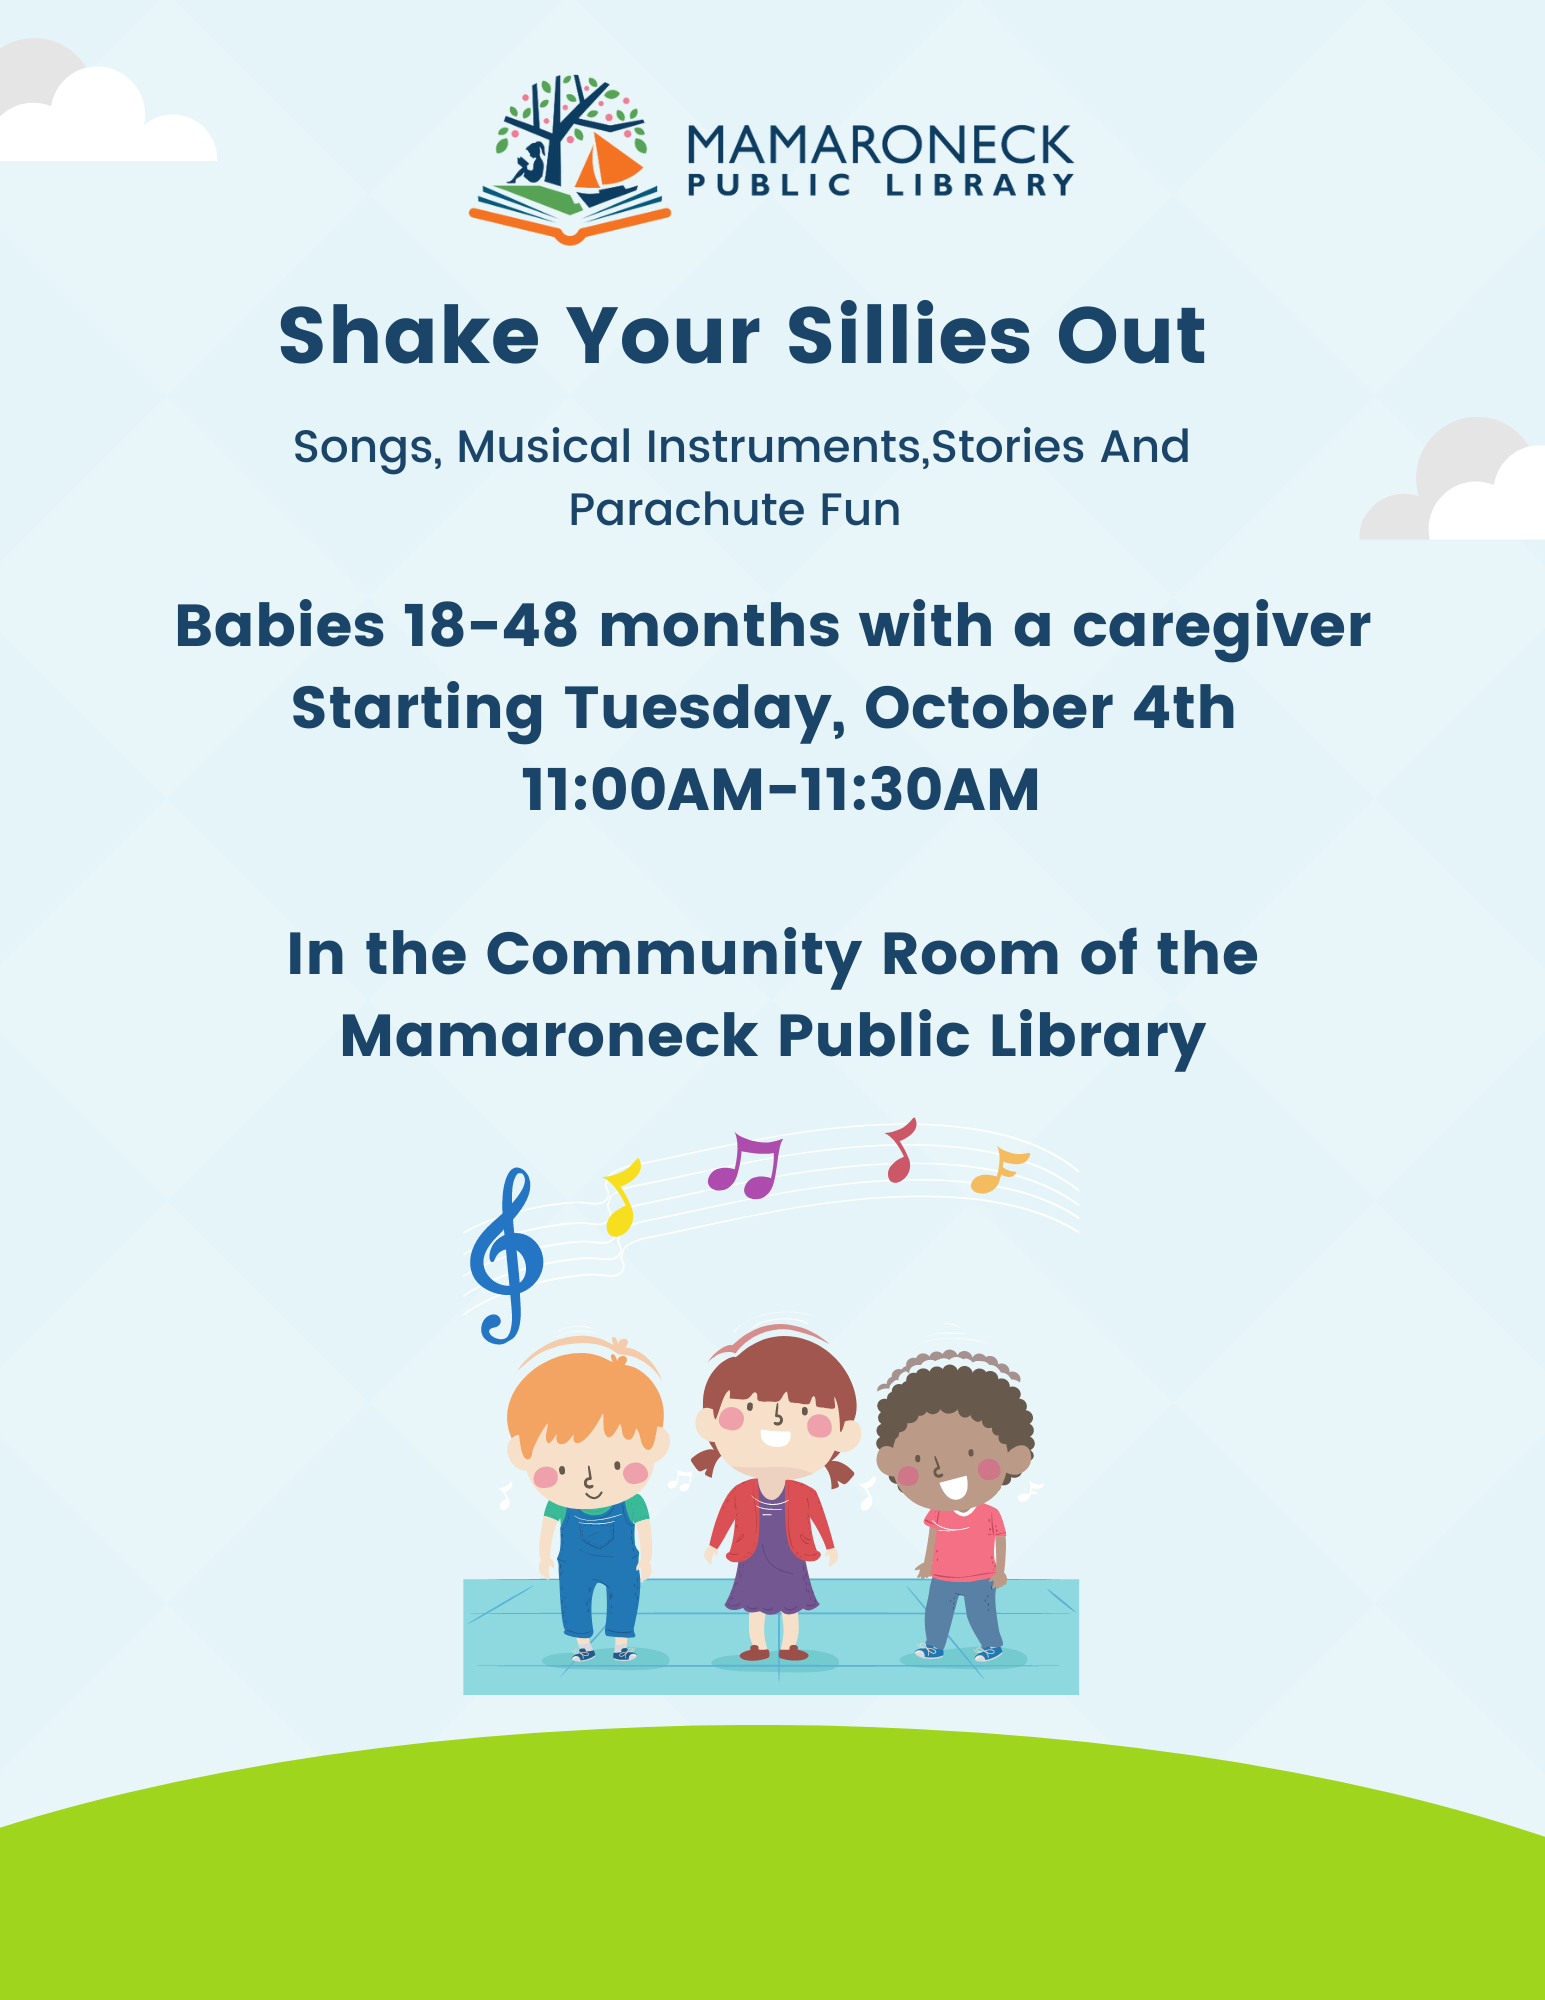 Shake Your Sillies Out Tuesday program for pre-school kids